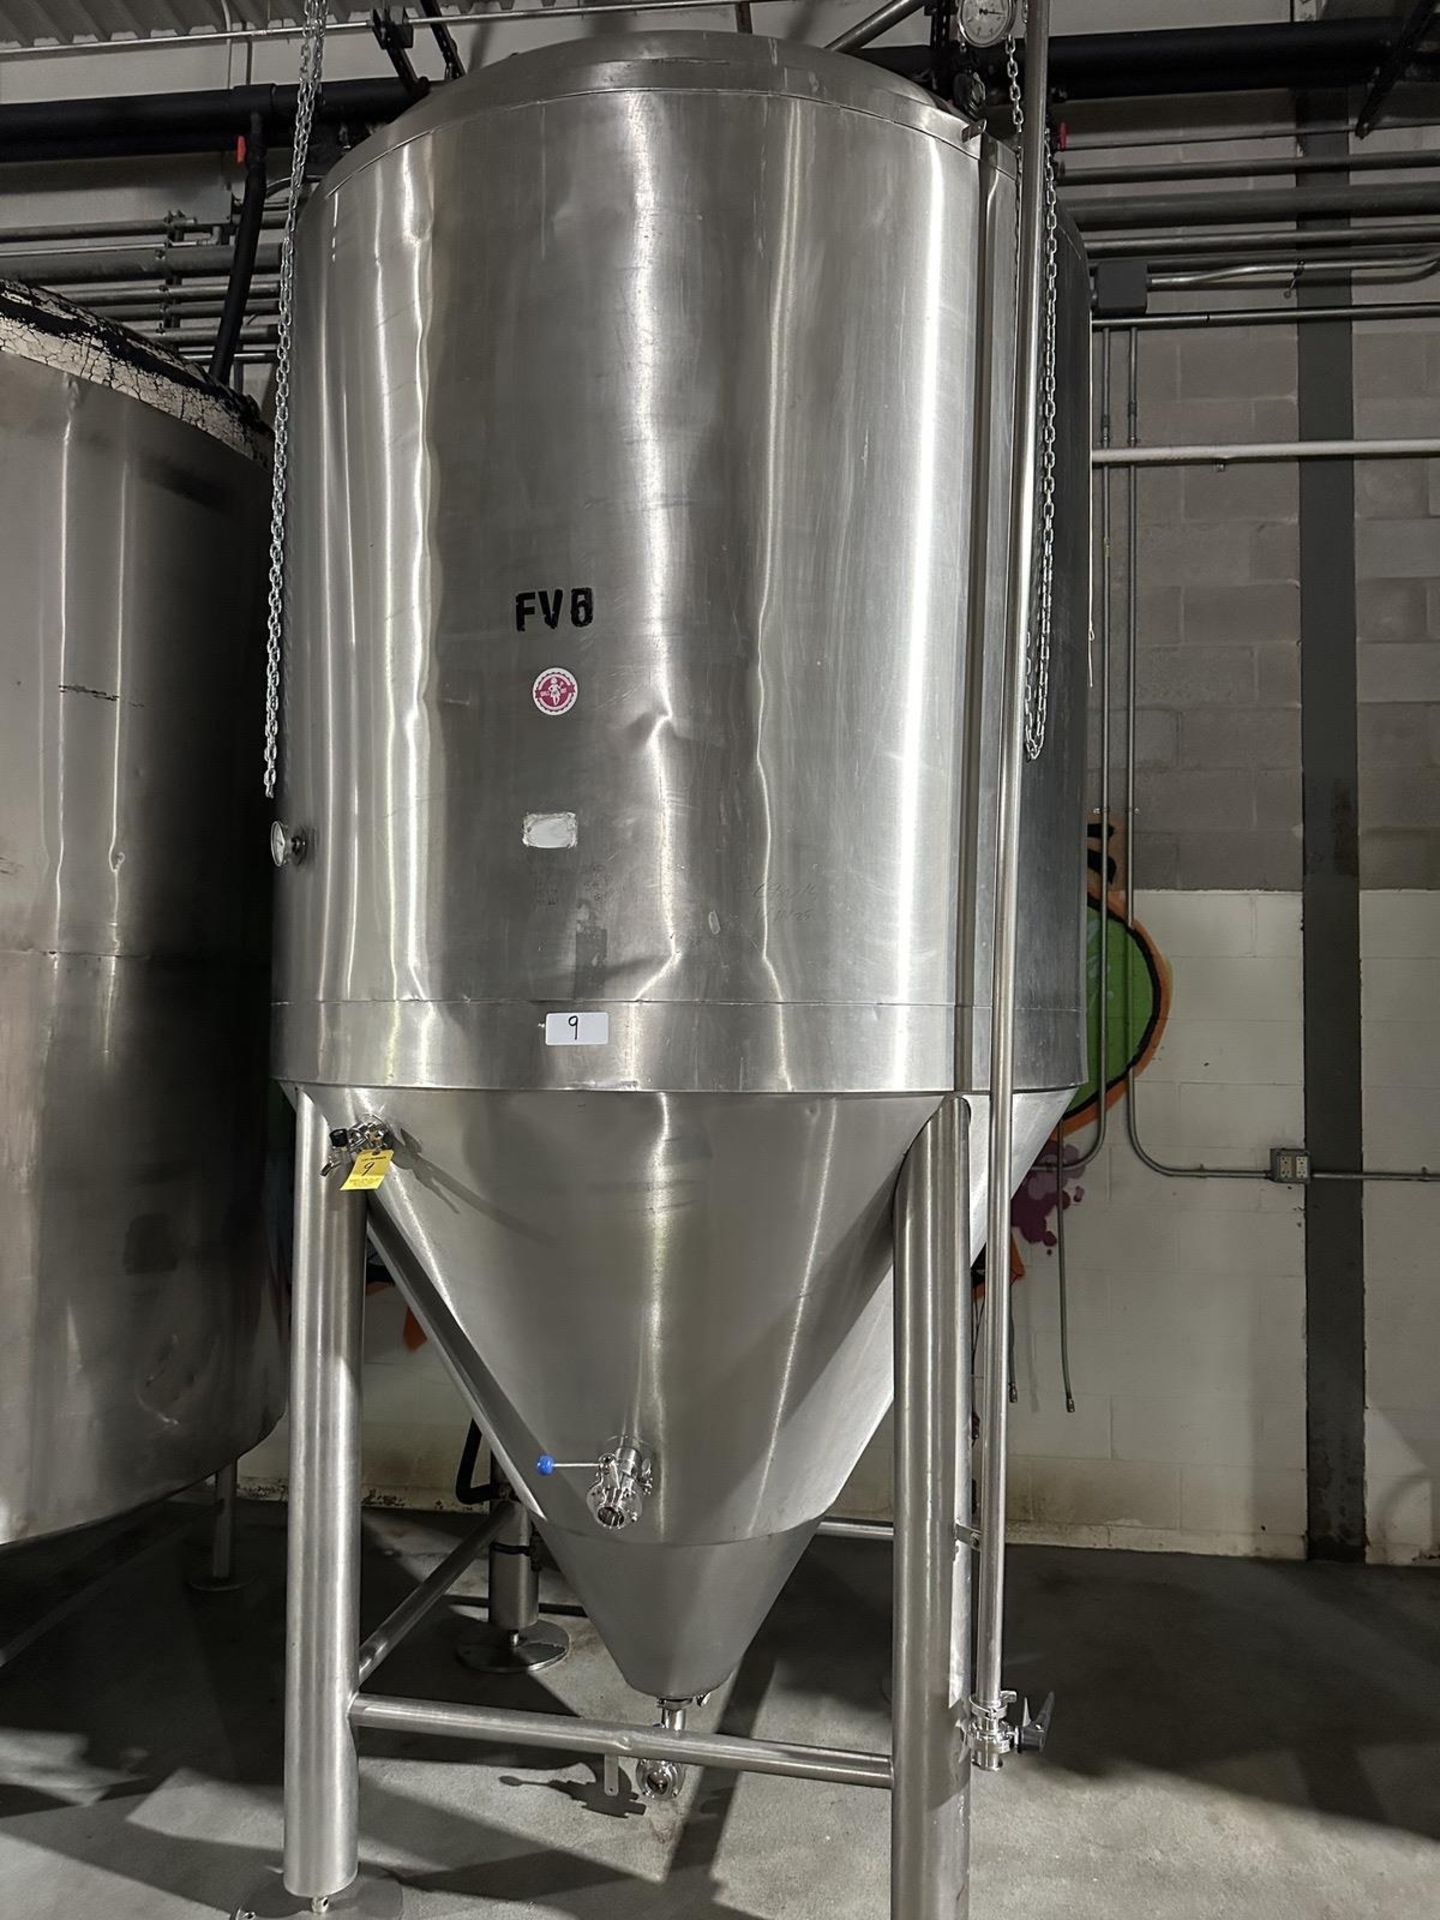 Approx. 30 BBL Stainless Steel Fermenter, Glycol Jacketed